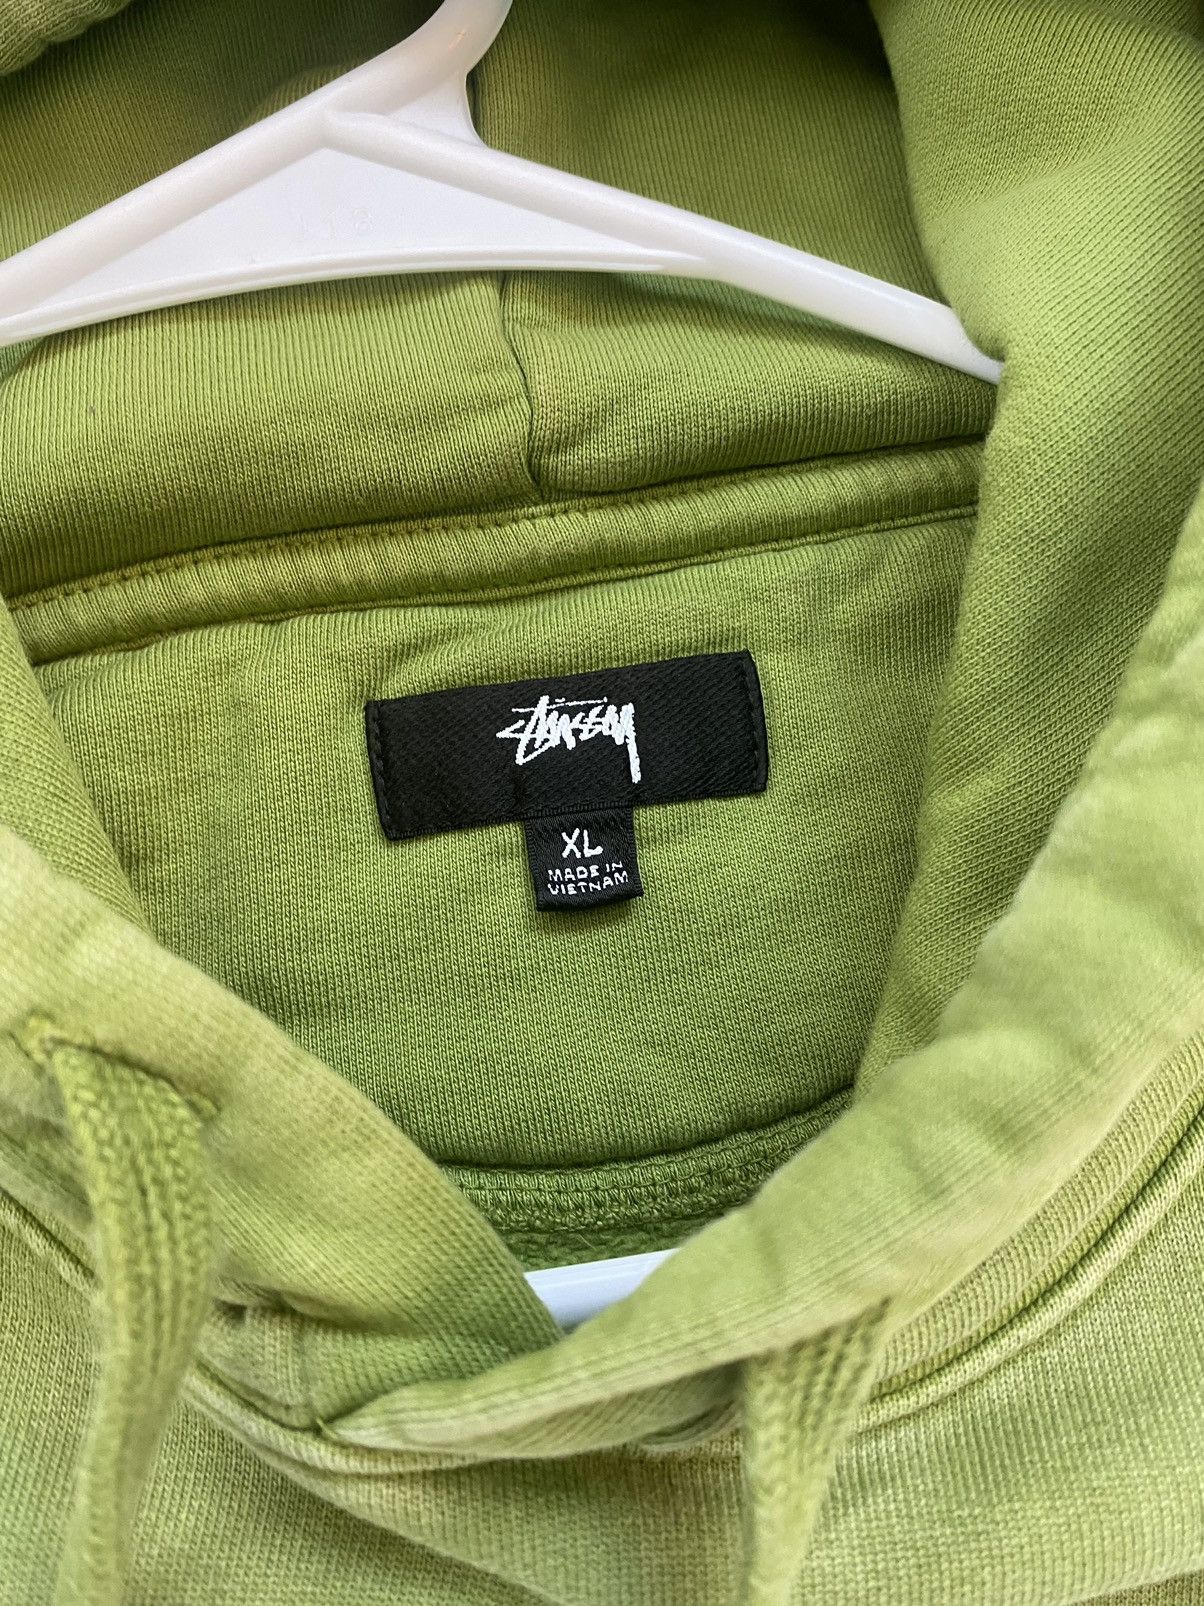 Stussy Over-dyed Stussy Designs Hoodie Size US XL / EU 56 / 4 - 4 Thumbnail